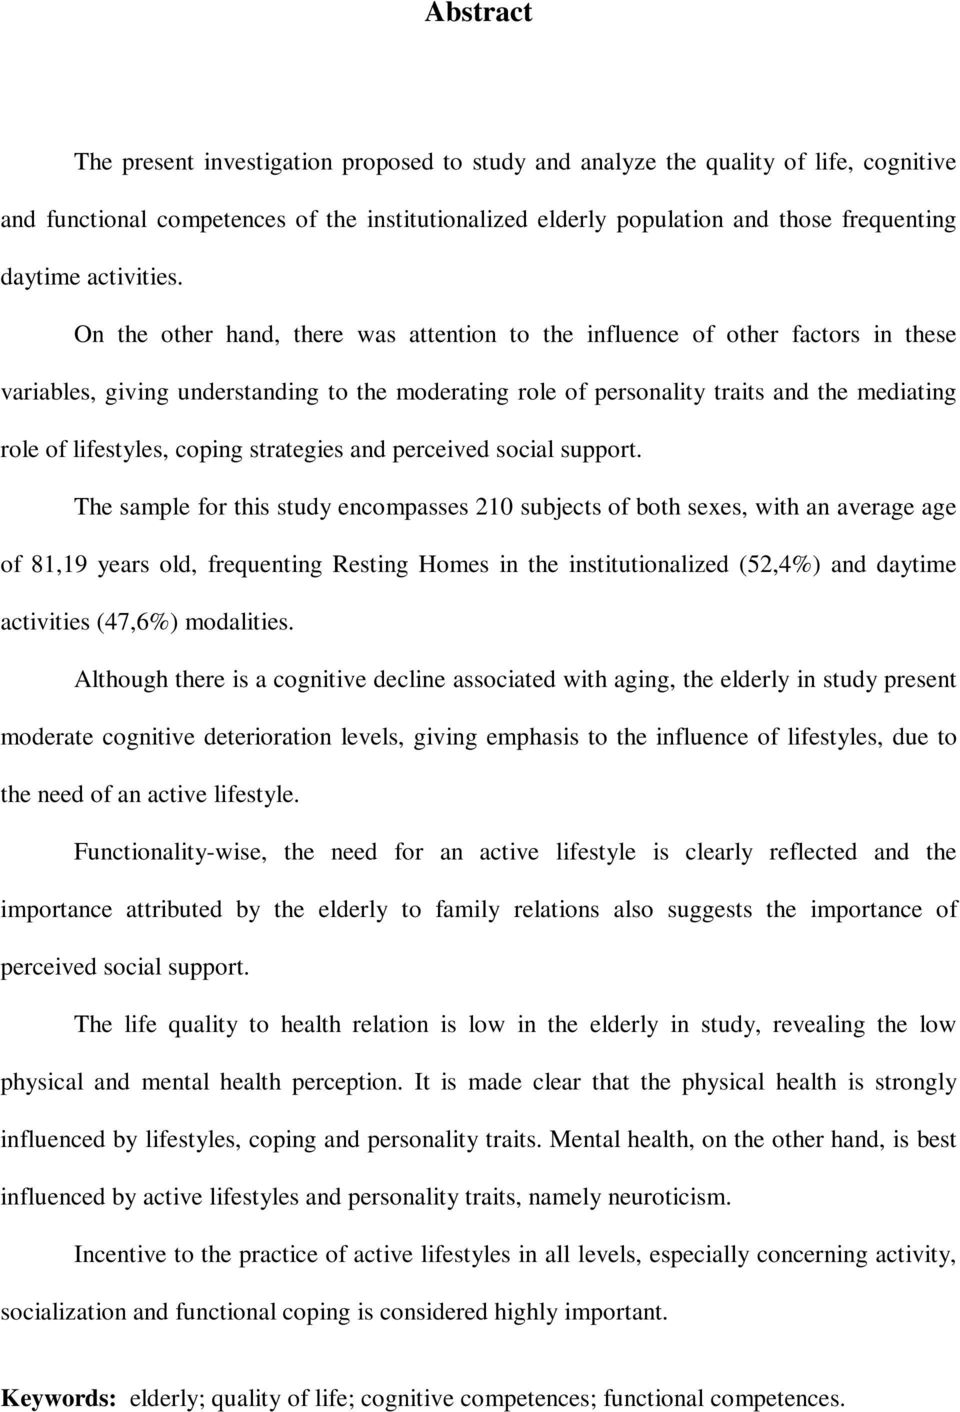 On the other hand, there was attention to the influence of other factors in these variables, giving understanding to the moderating role of personality traits and the mediating role of lifestyles,